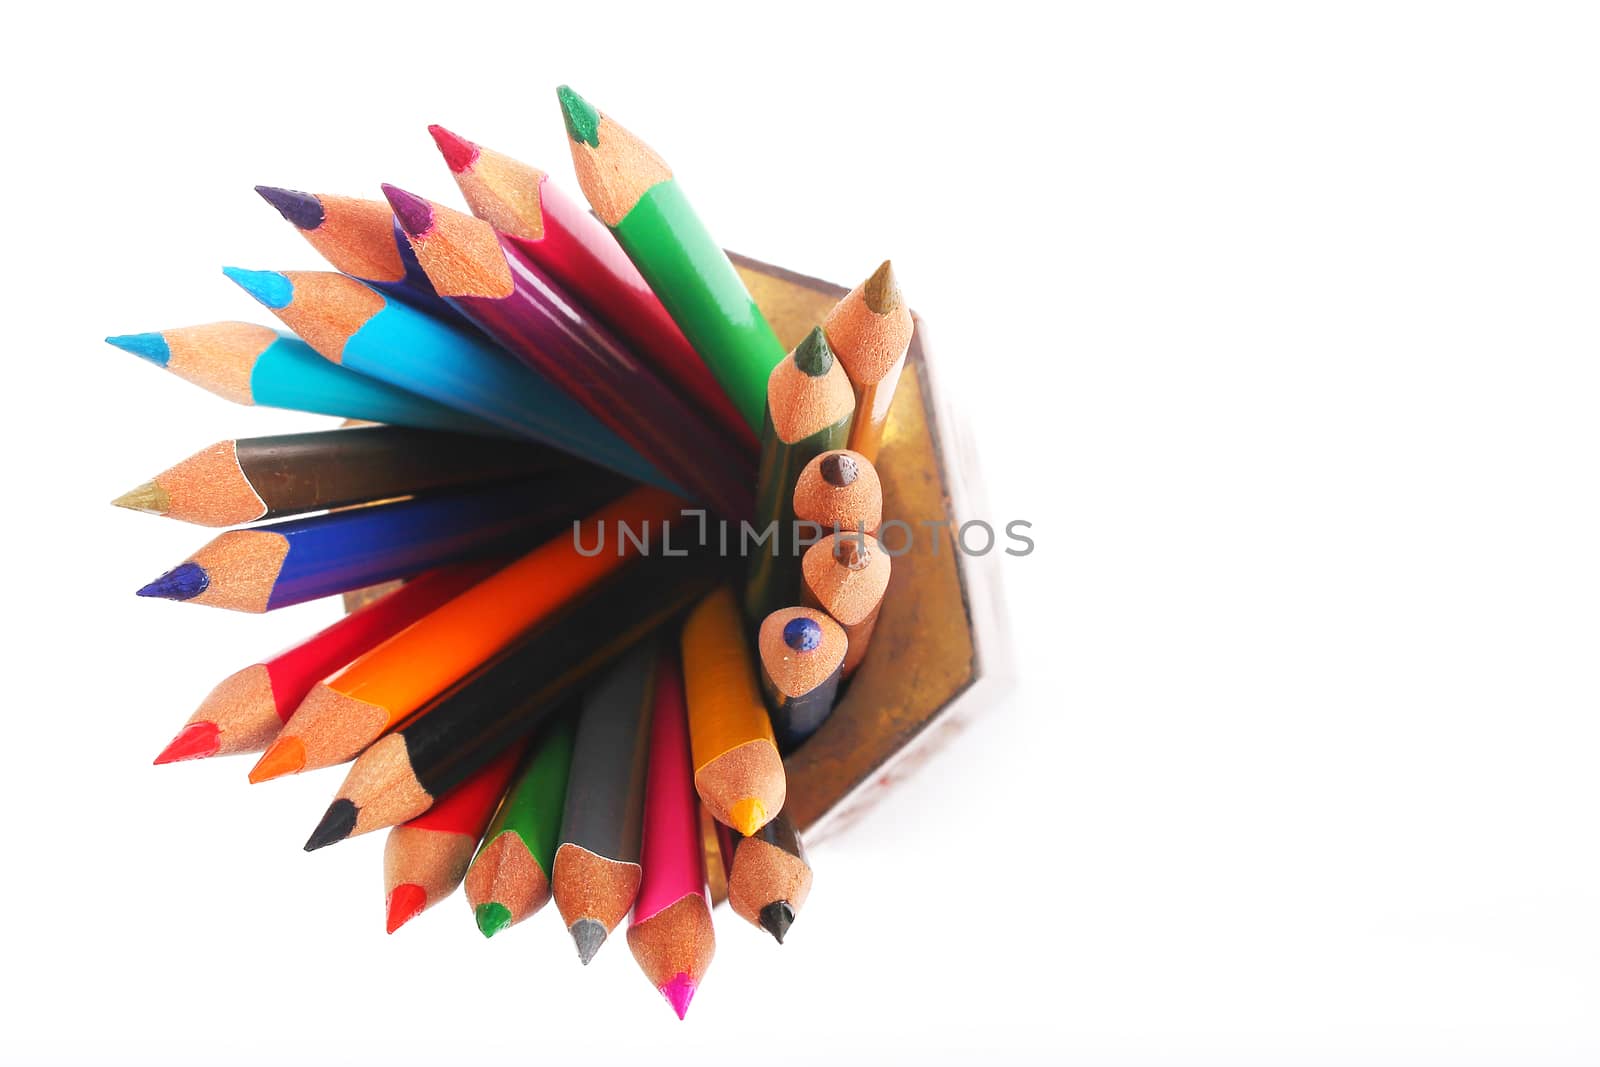 pencil colors in stand from top